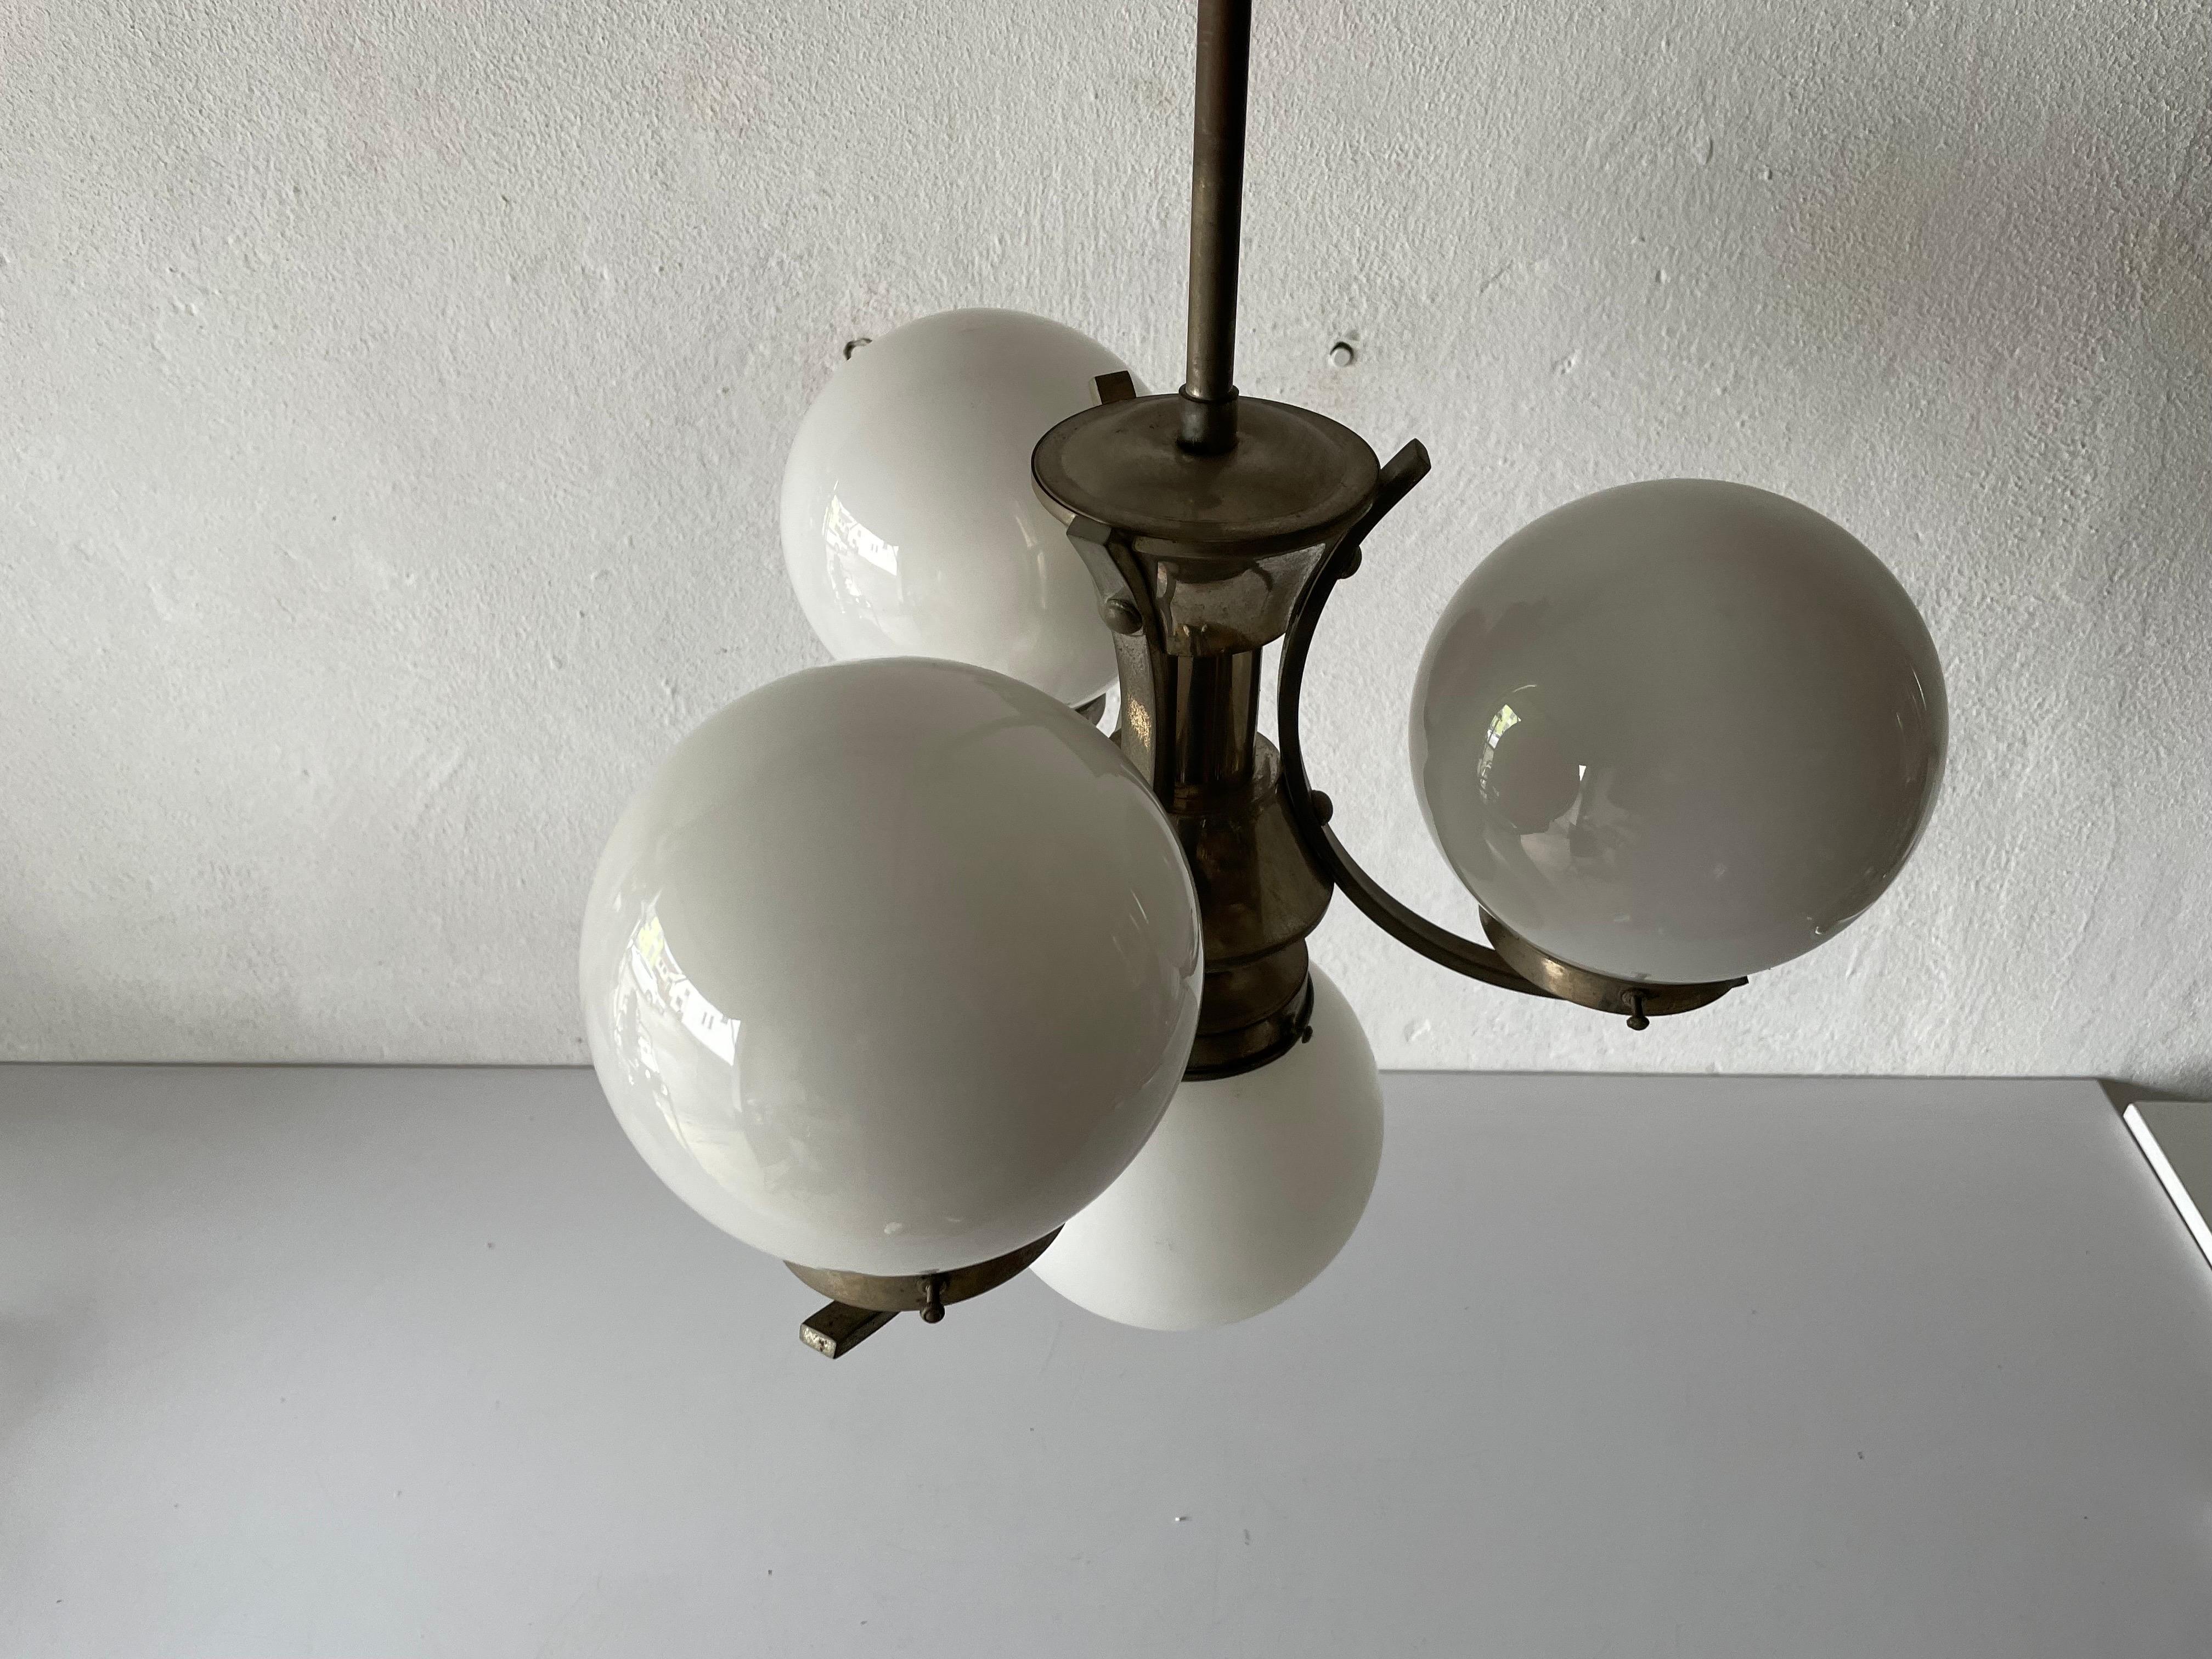 Art Deco metallic silver 4 balls ceiling lamp, 1940s, Germany

Lampshade is in good condition and very clean. 
This lamp works with 4 x E27 light bulb. 
Wired and suitable to use with 220V and 110V for all countries.

Measures: 

Height: 65